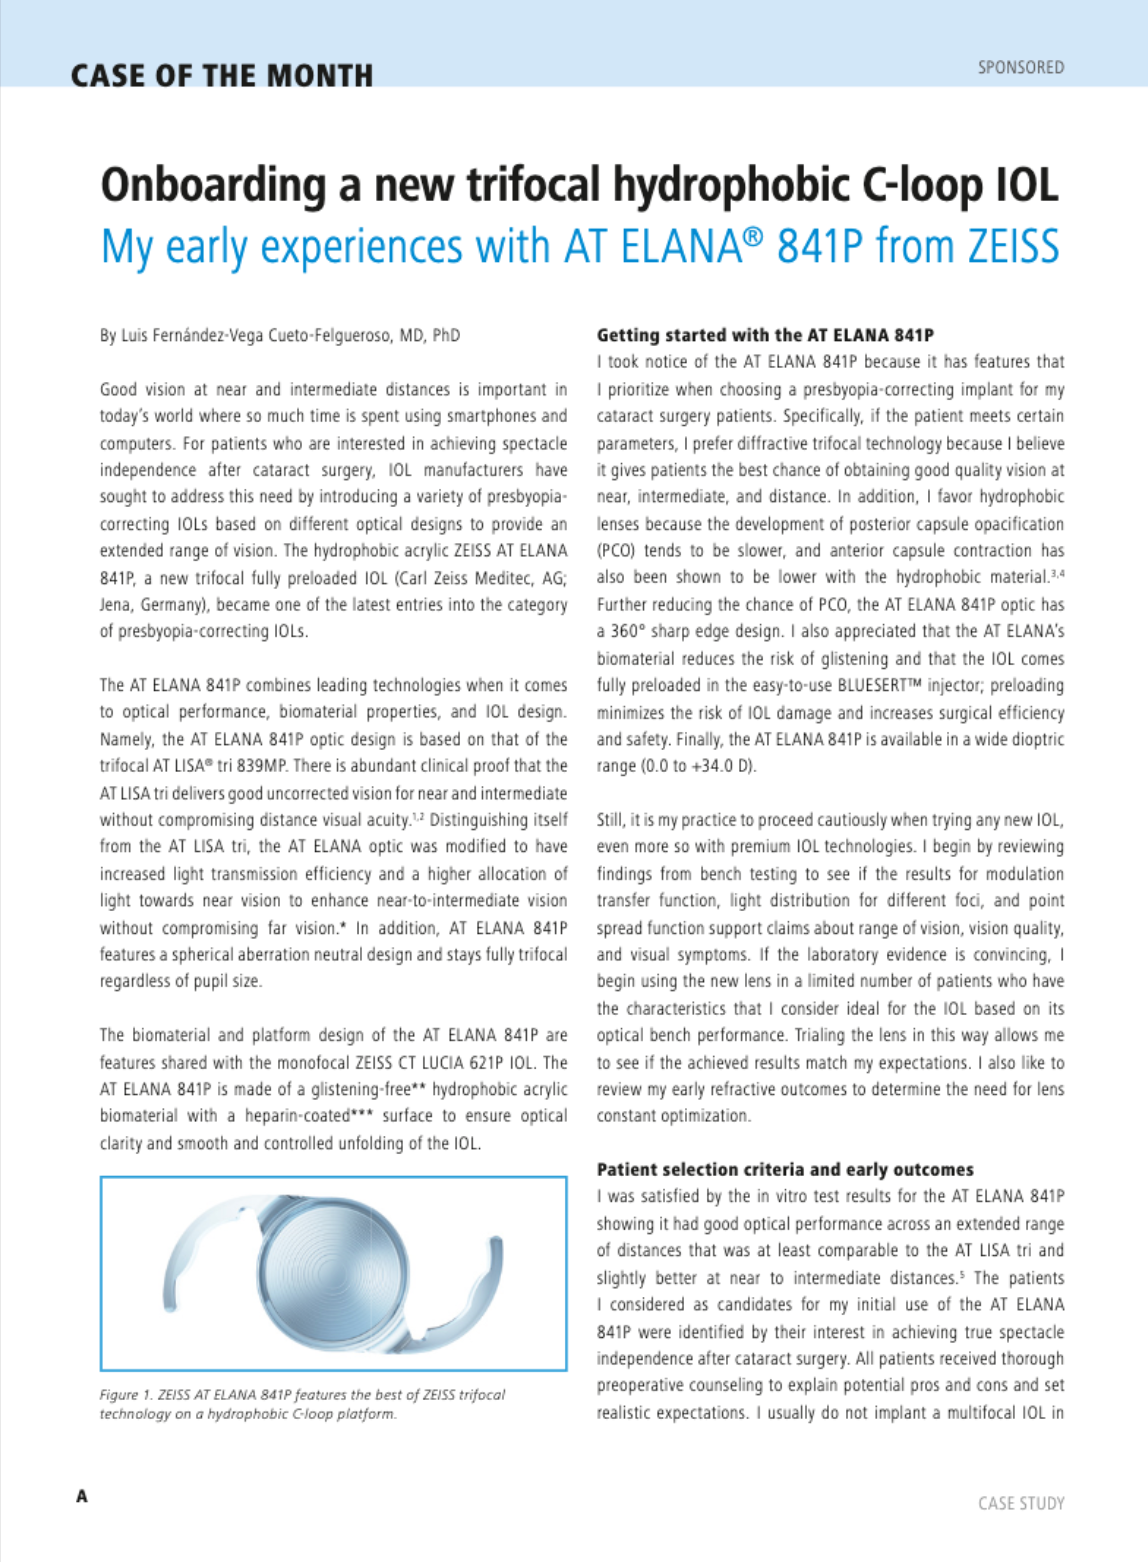 Onboarding a new trifocal hydrophobic C-loop IOL My early experiences with AT ELANA® 841P from ZEISS